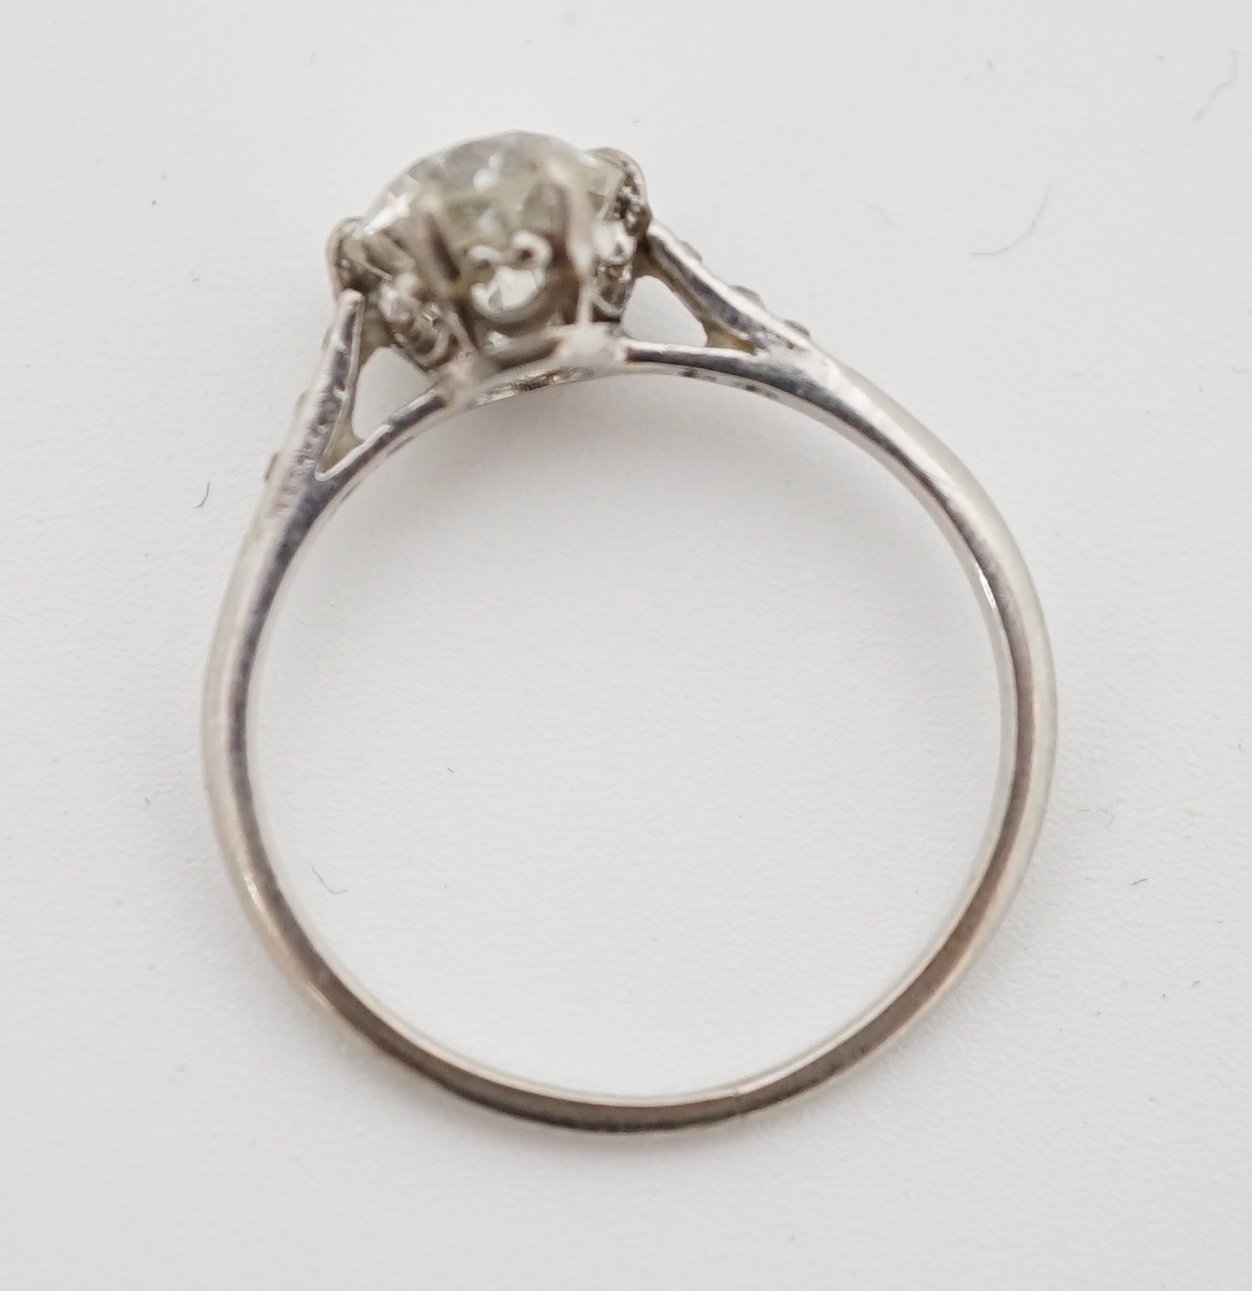 A platinum and single stone diamond ring, with diamond chip set shoulders